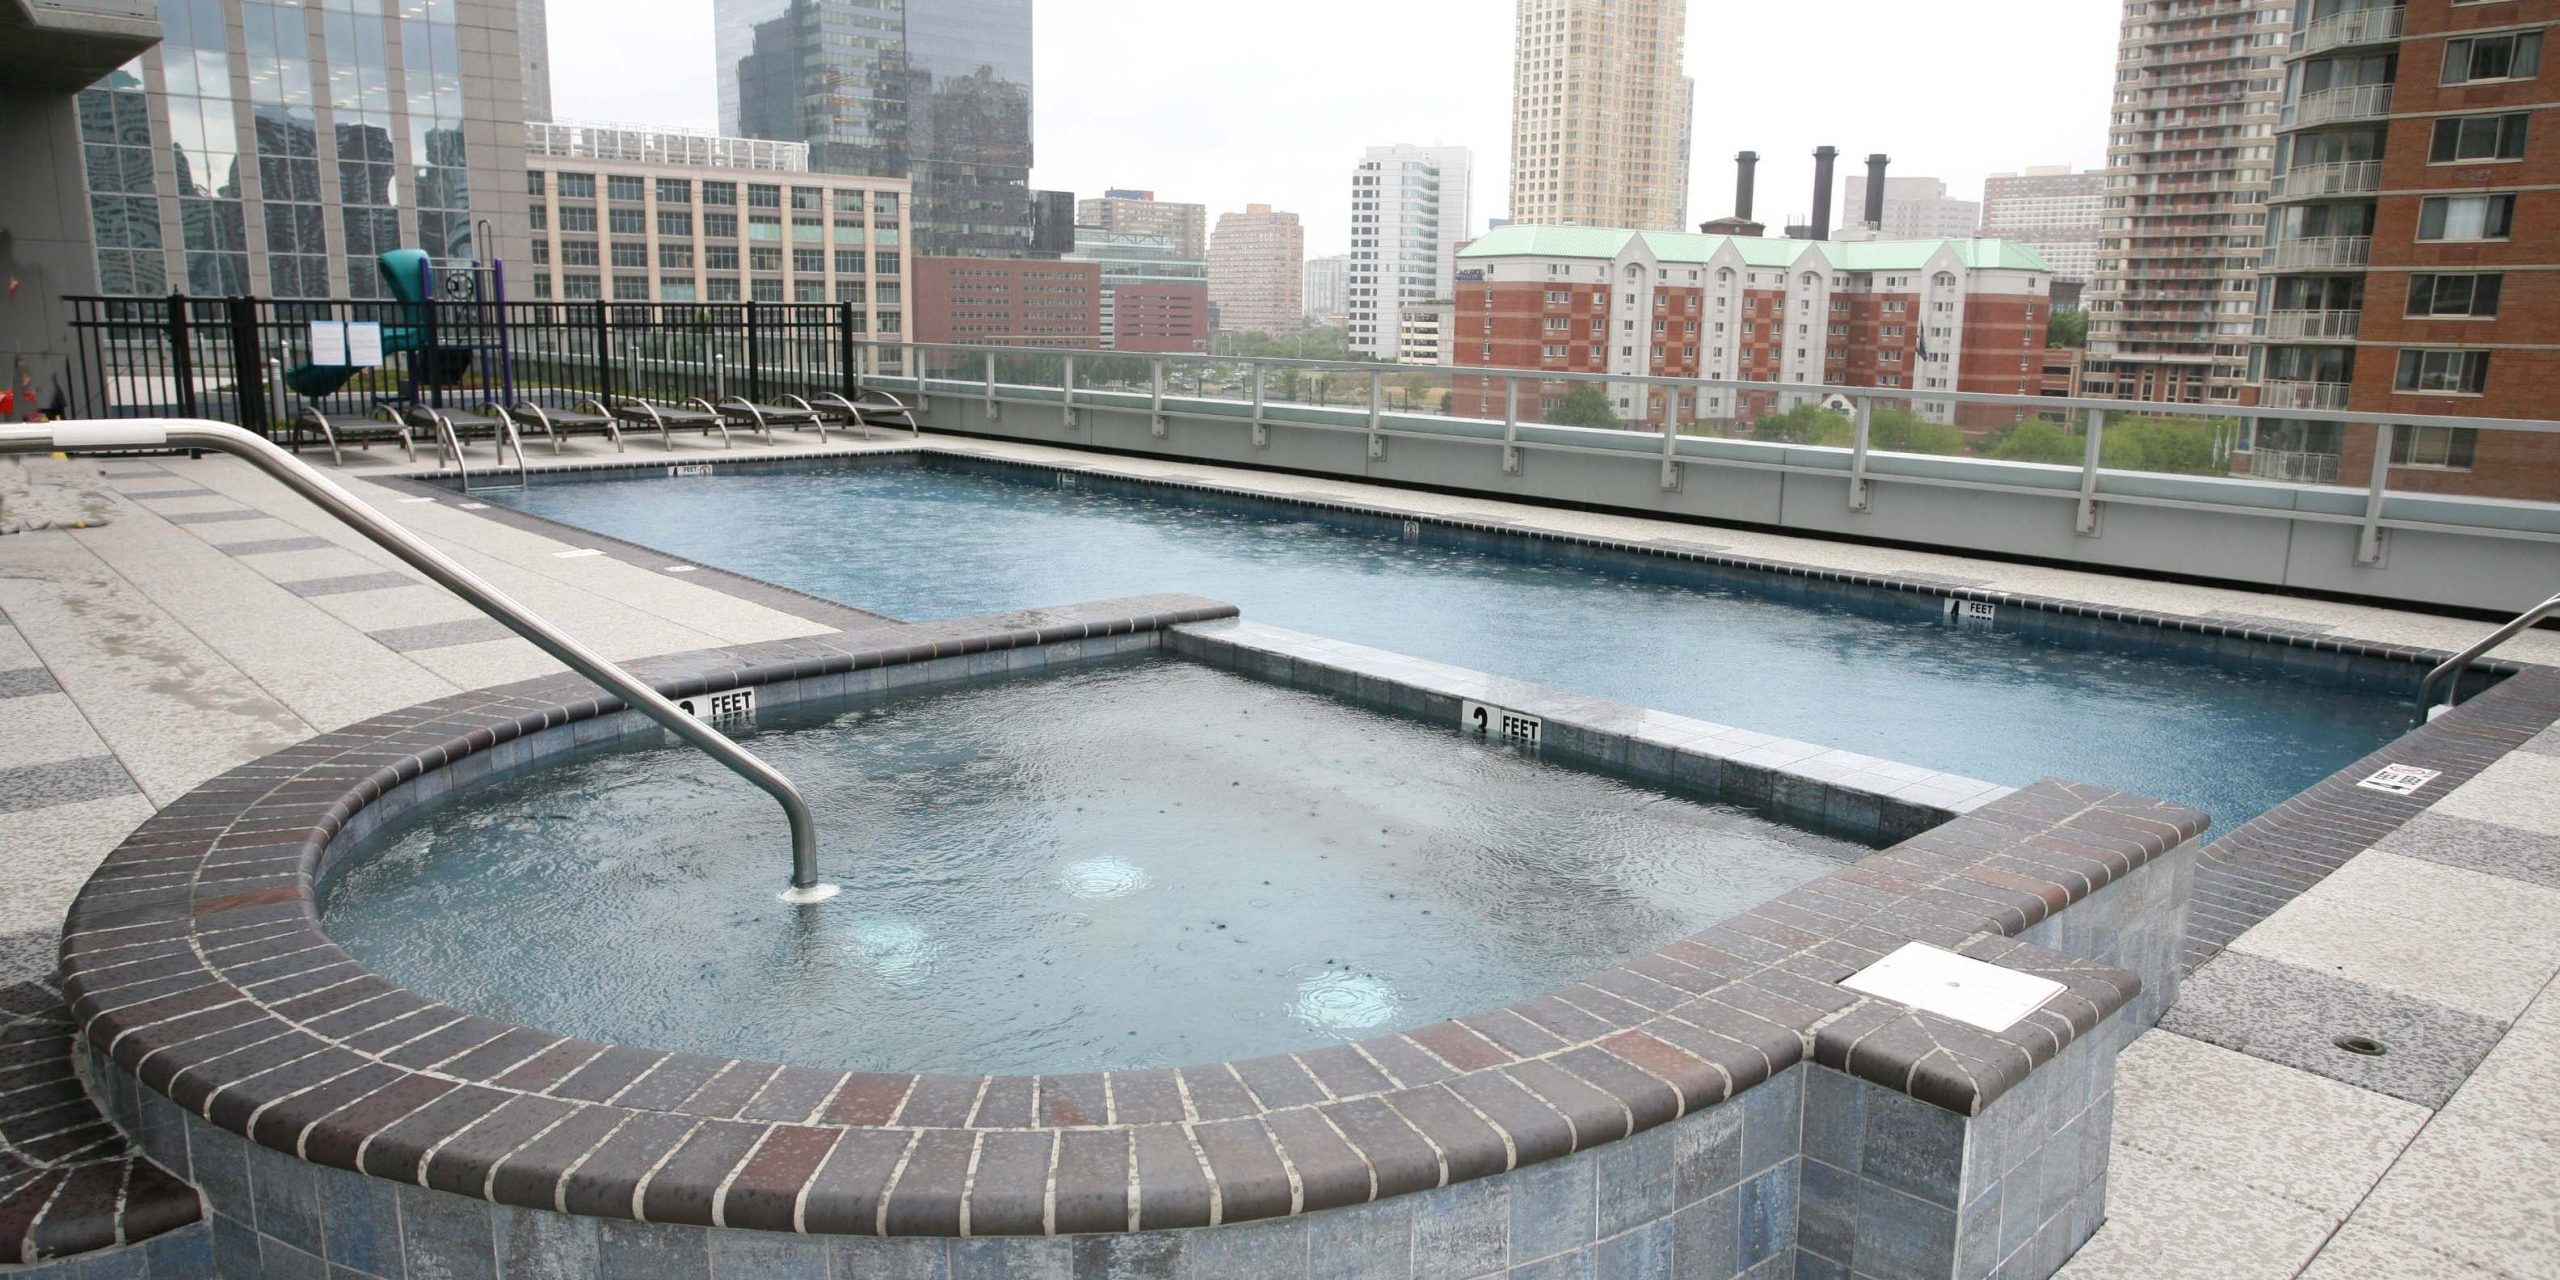 Crystal-Point-2-2nd-St-Jersey-City-Outdoor-Jacuzzi-and-Swimming-Pool-scaled.jpg